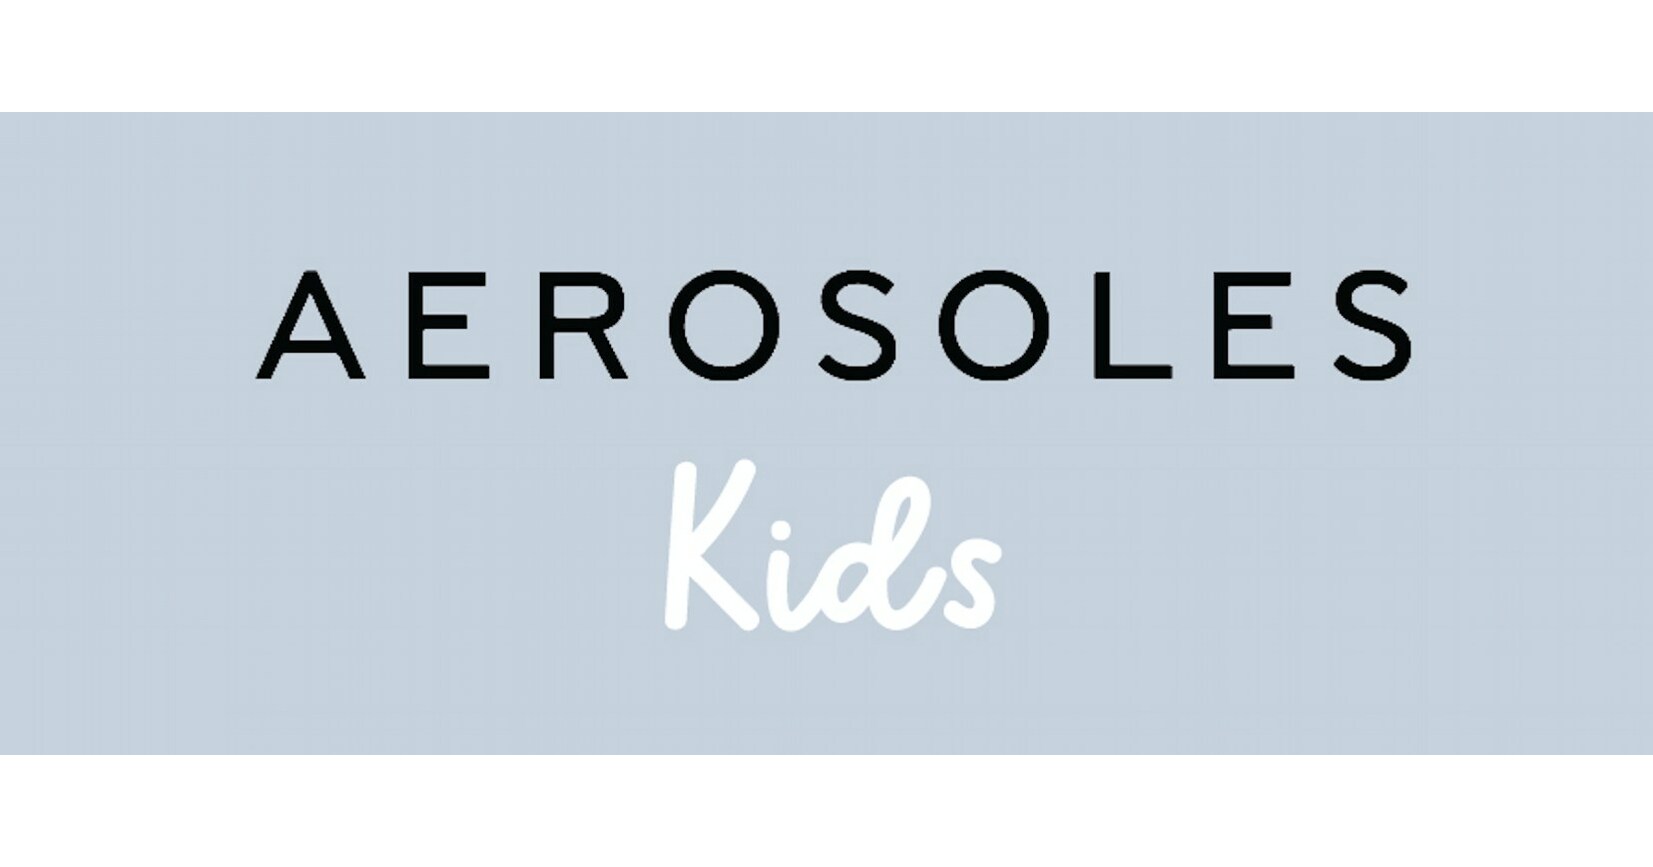 AEROSOLES SIGNS LICENSING AGREEMENT WITH MAZE COLLECTIONS, INC. TO EXPAND  INTO APPAREL